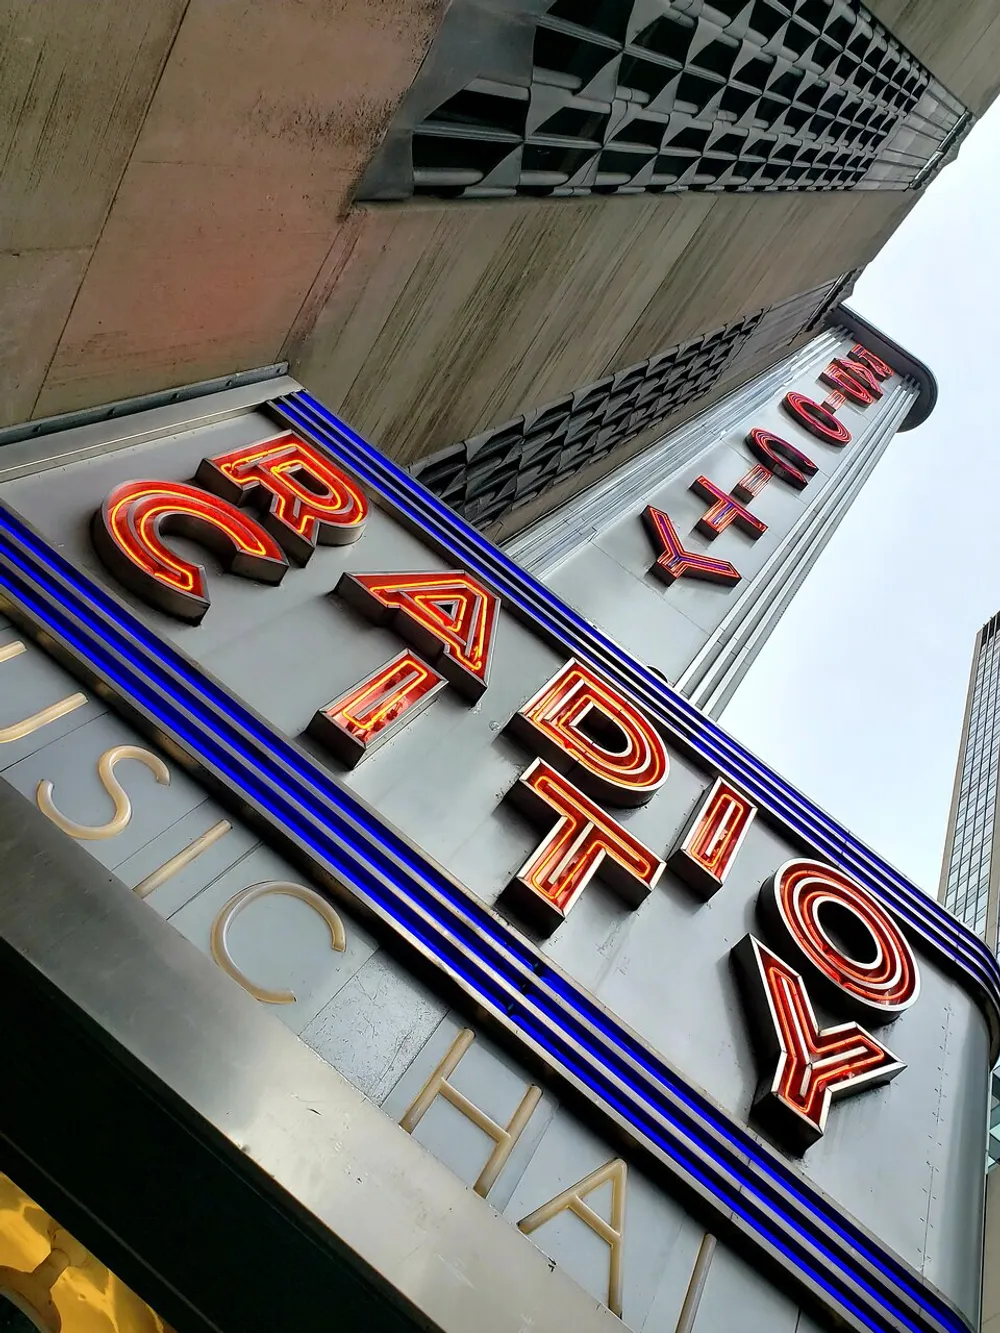 The image shows a low-angle view of the Radio City Music Hall marquee with the iconic neon sign set against the backdrop of a building in an urban environment